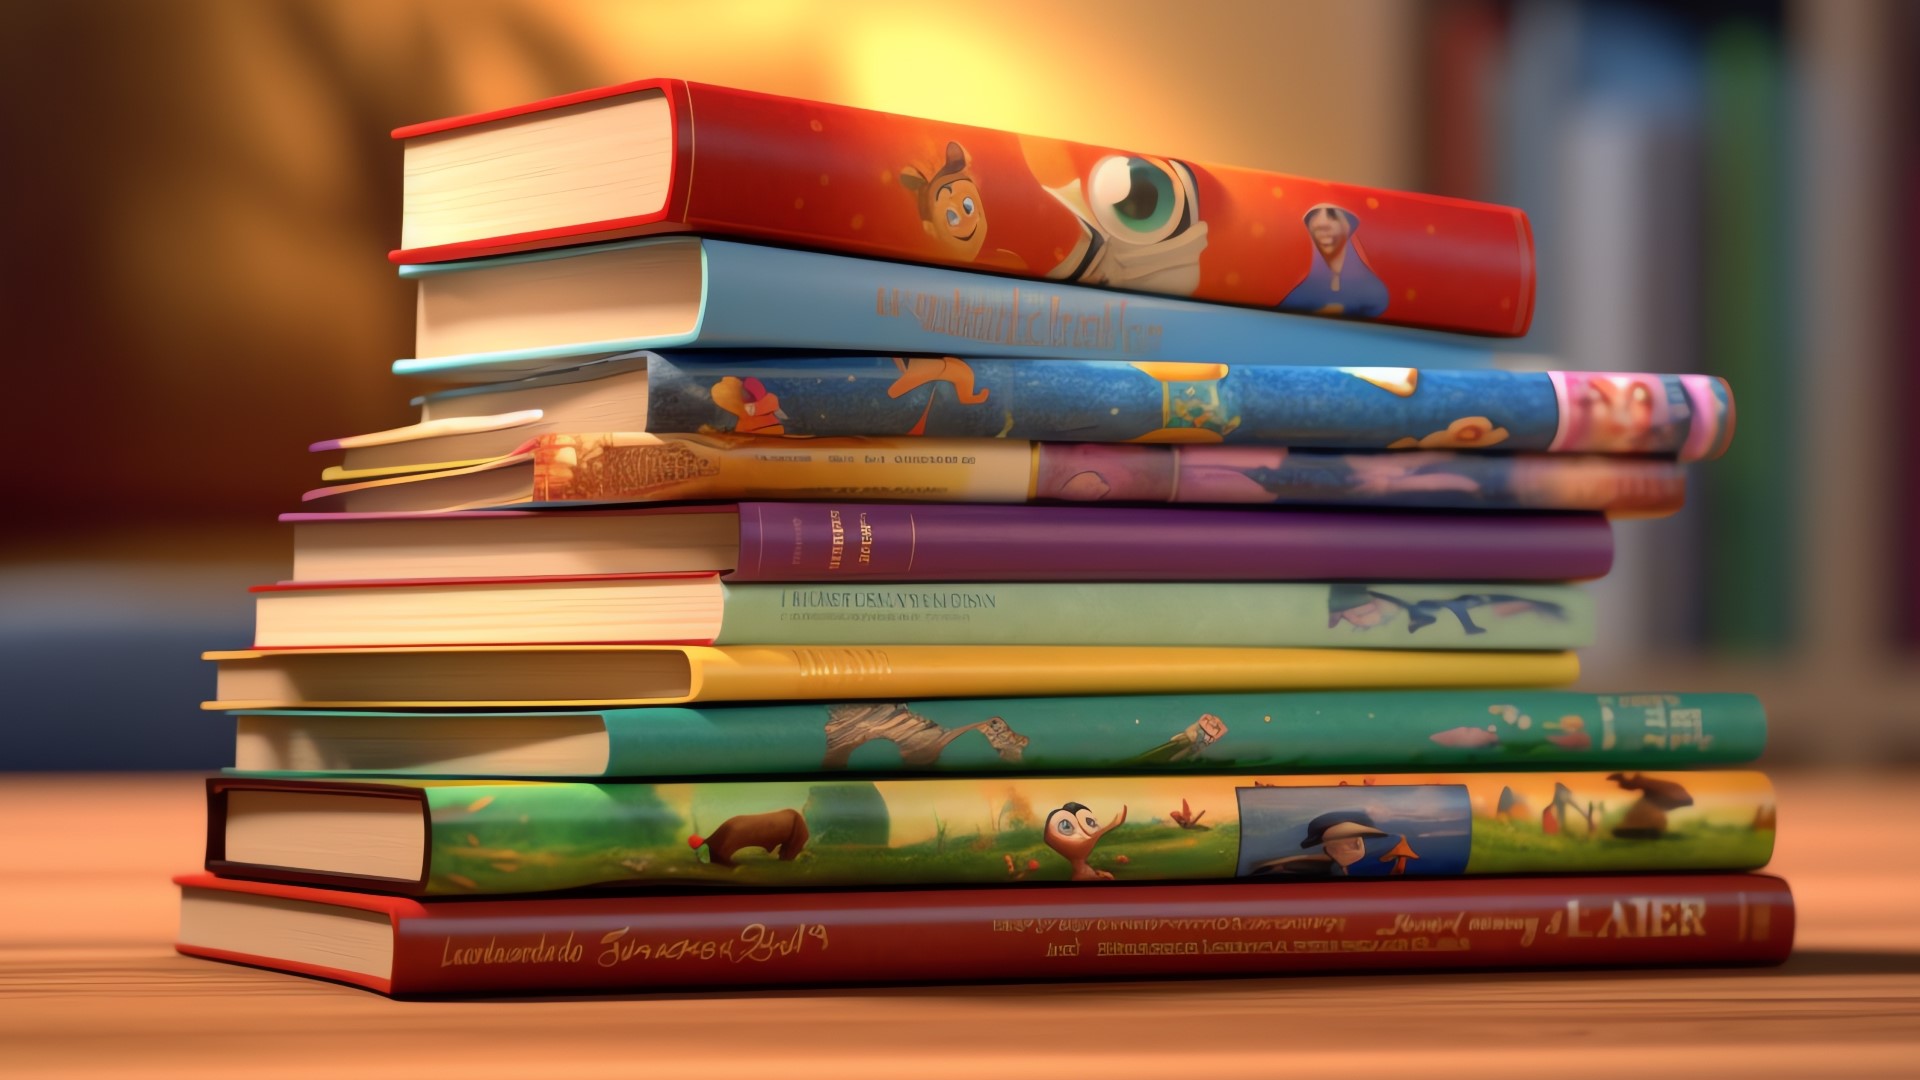 The program provides all children under the age of five with a free monthly book to help them "develop a love of reading and prepare for kindergarten."